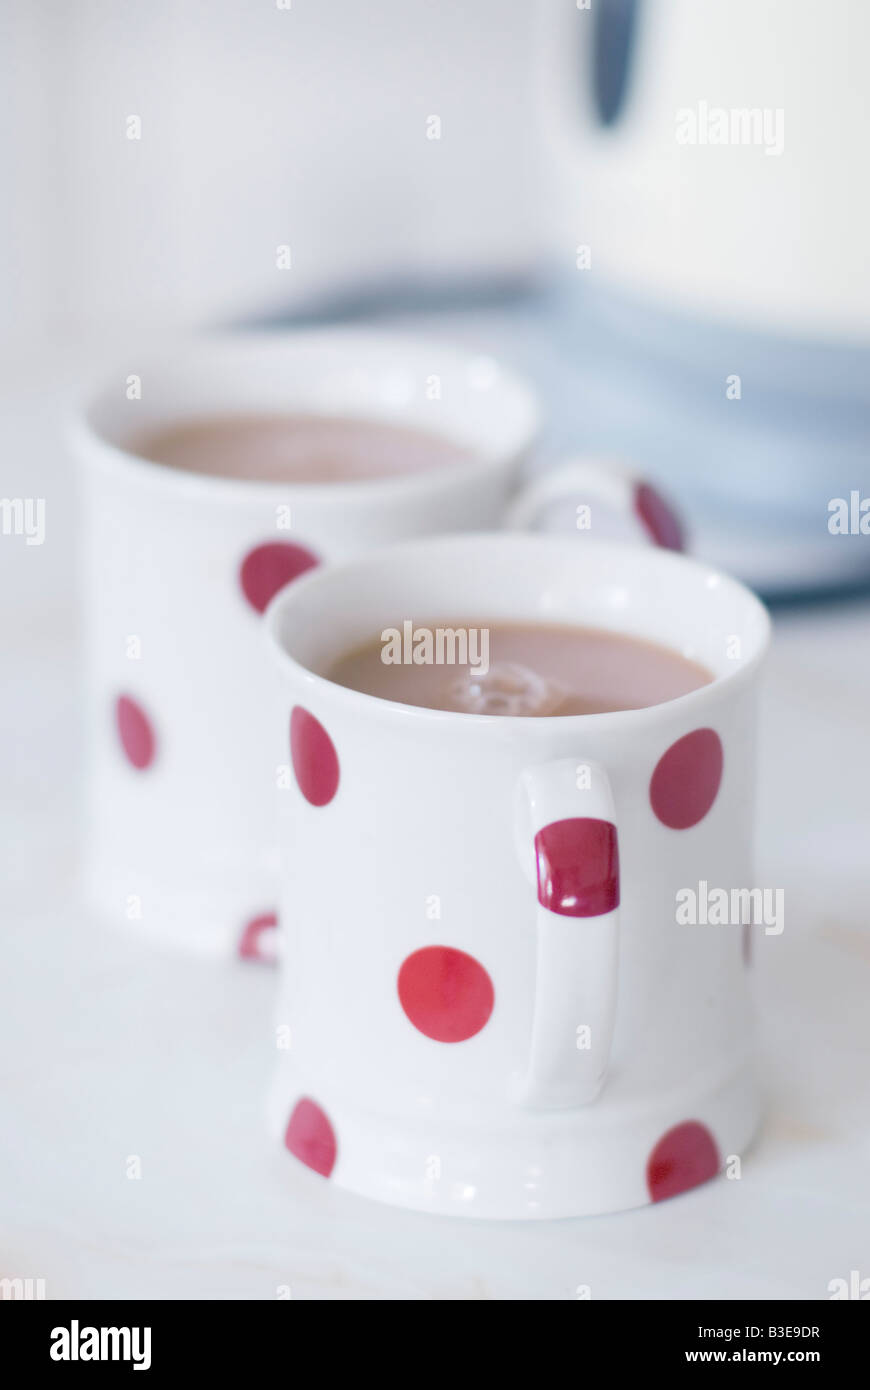 Red polka dot tea mugs with kettle in background Stock Photo